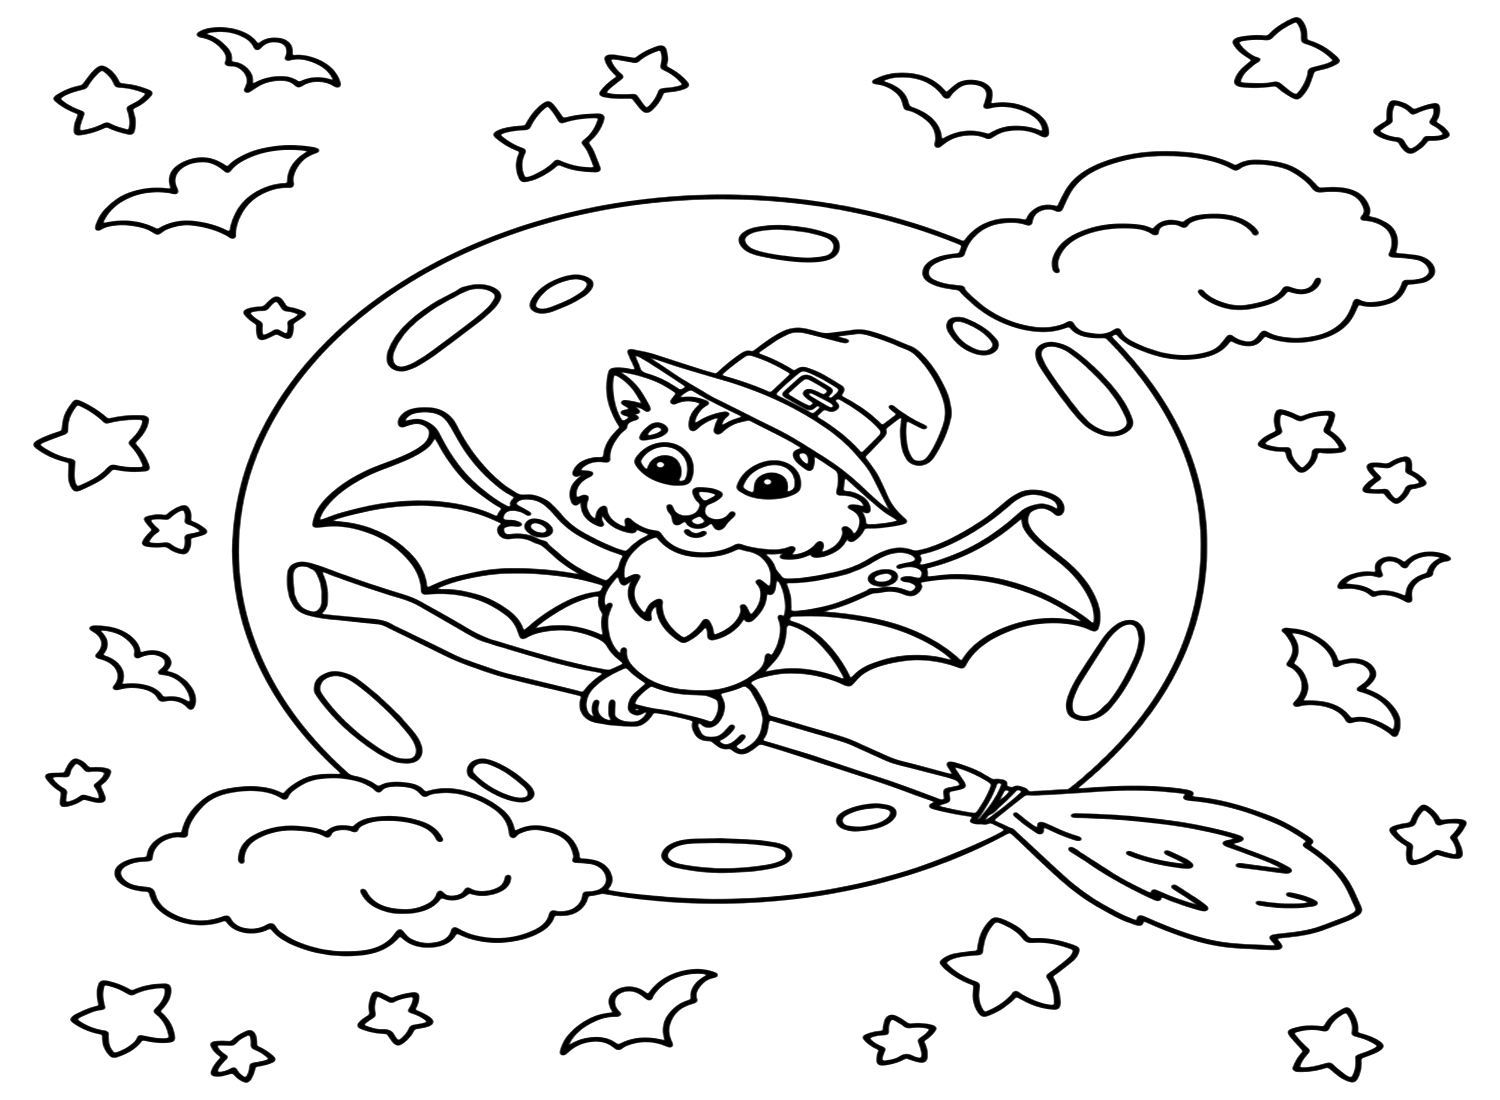 Coloring Pictures Of Halloween Bats - Free Printable Coloring Pages